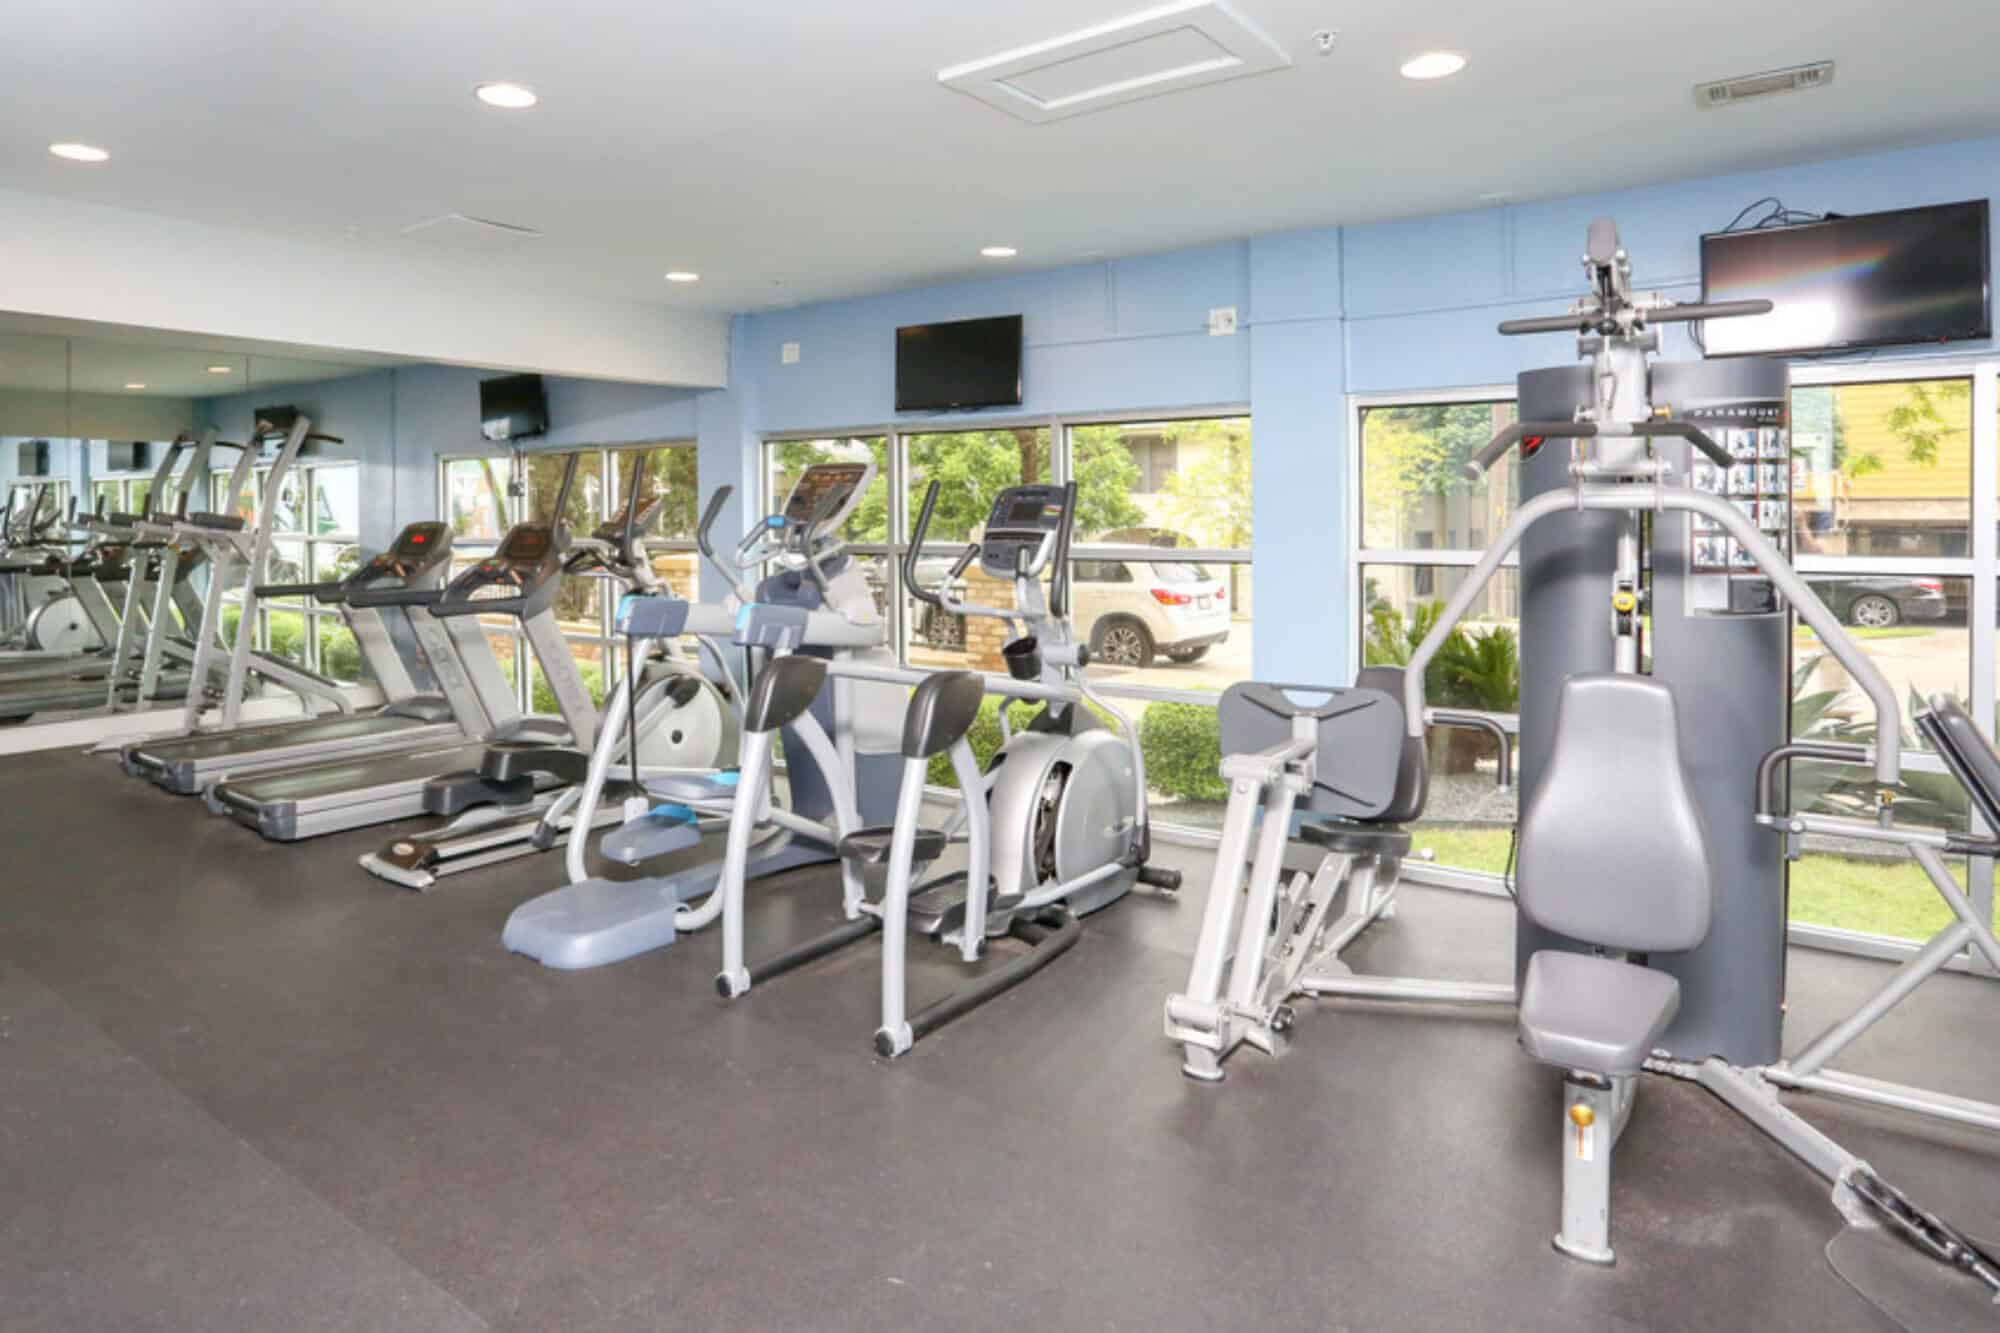 villas on guadalupe off campus apartments near ut austin resident clubhouse fitness center machines and equipment